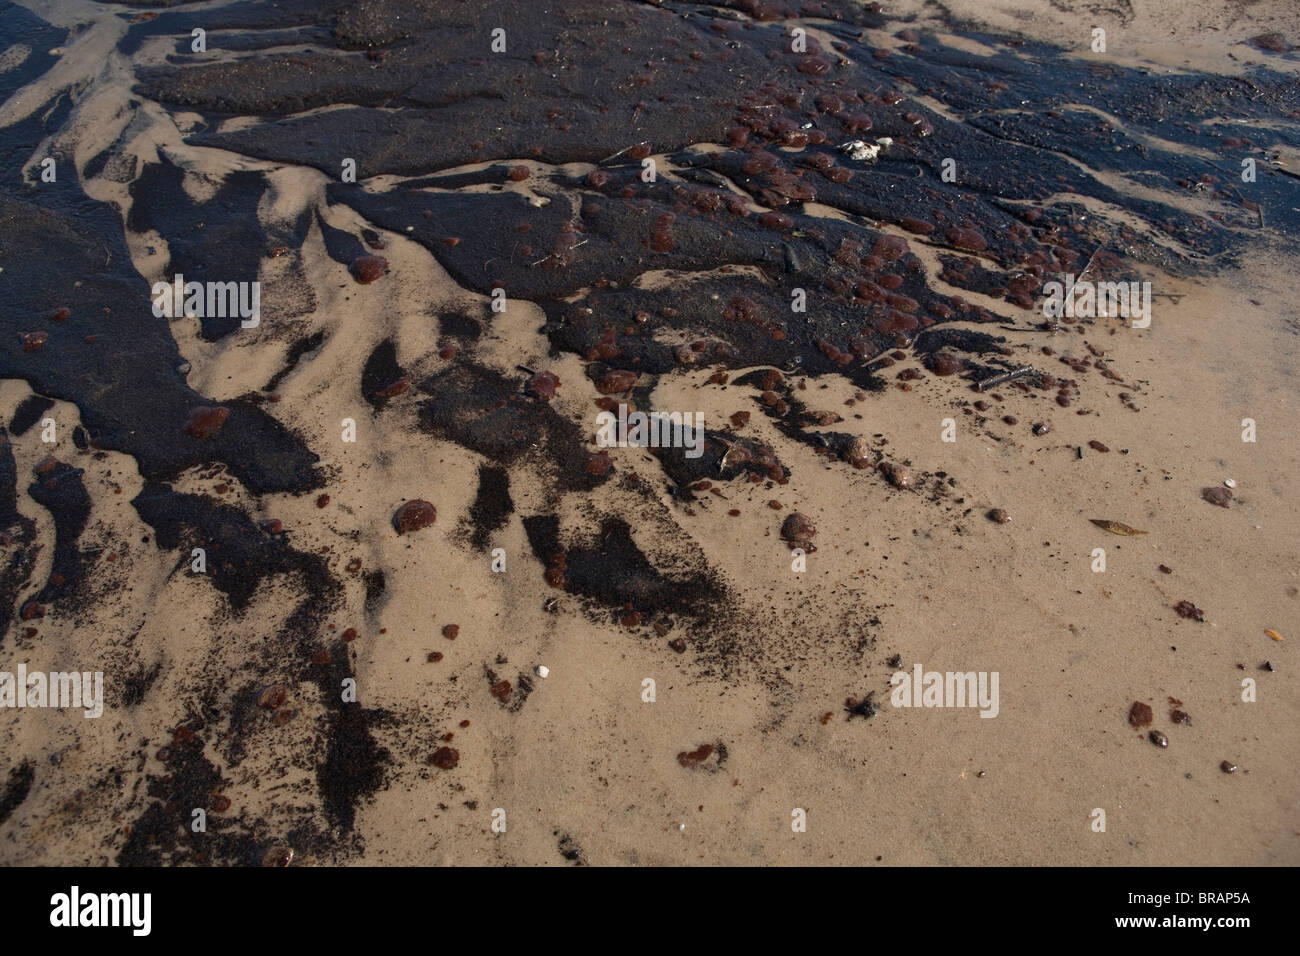 Oil from the BP oil spill in the Gulf of Mexico covers the shoreline of Waveland, Mississippi. Stock Photo